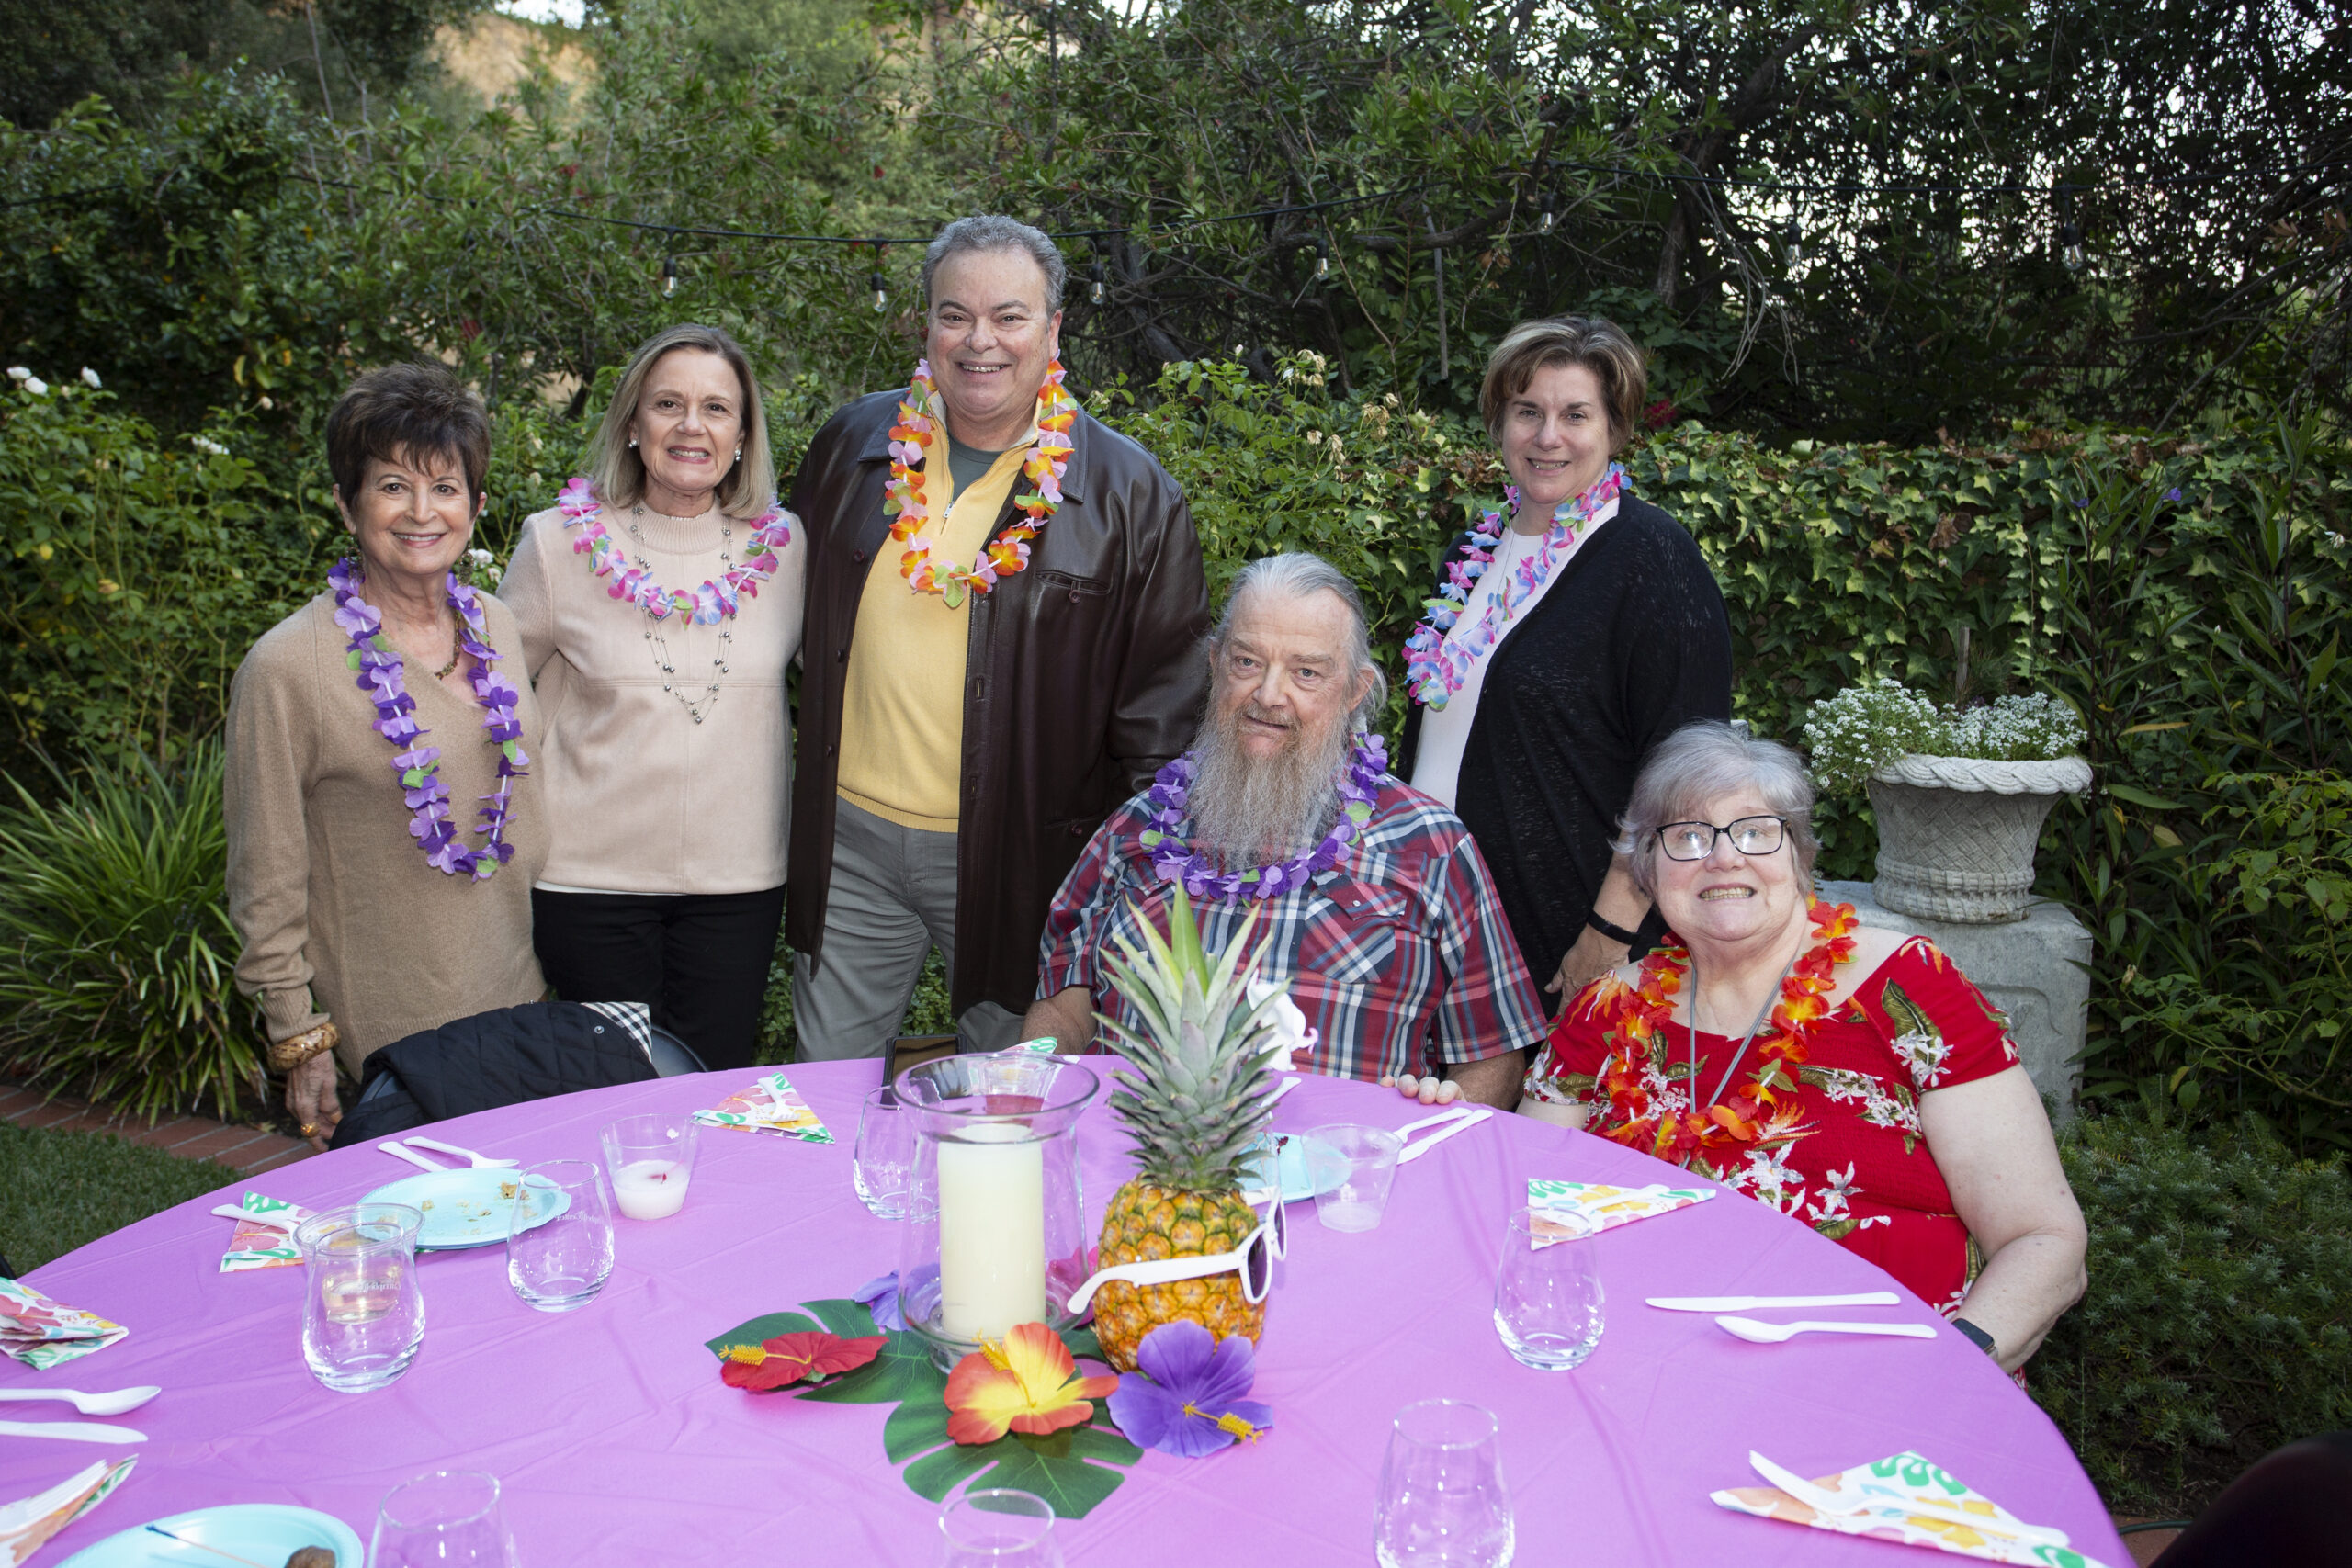 Luau guests group photo around a pink table